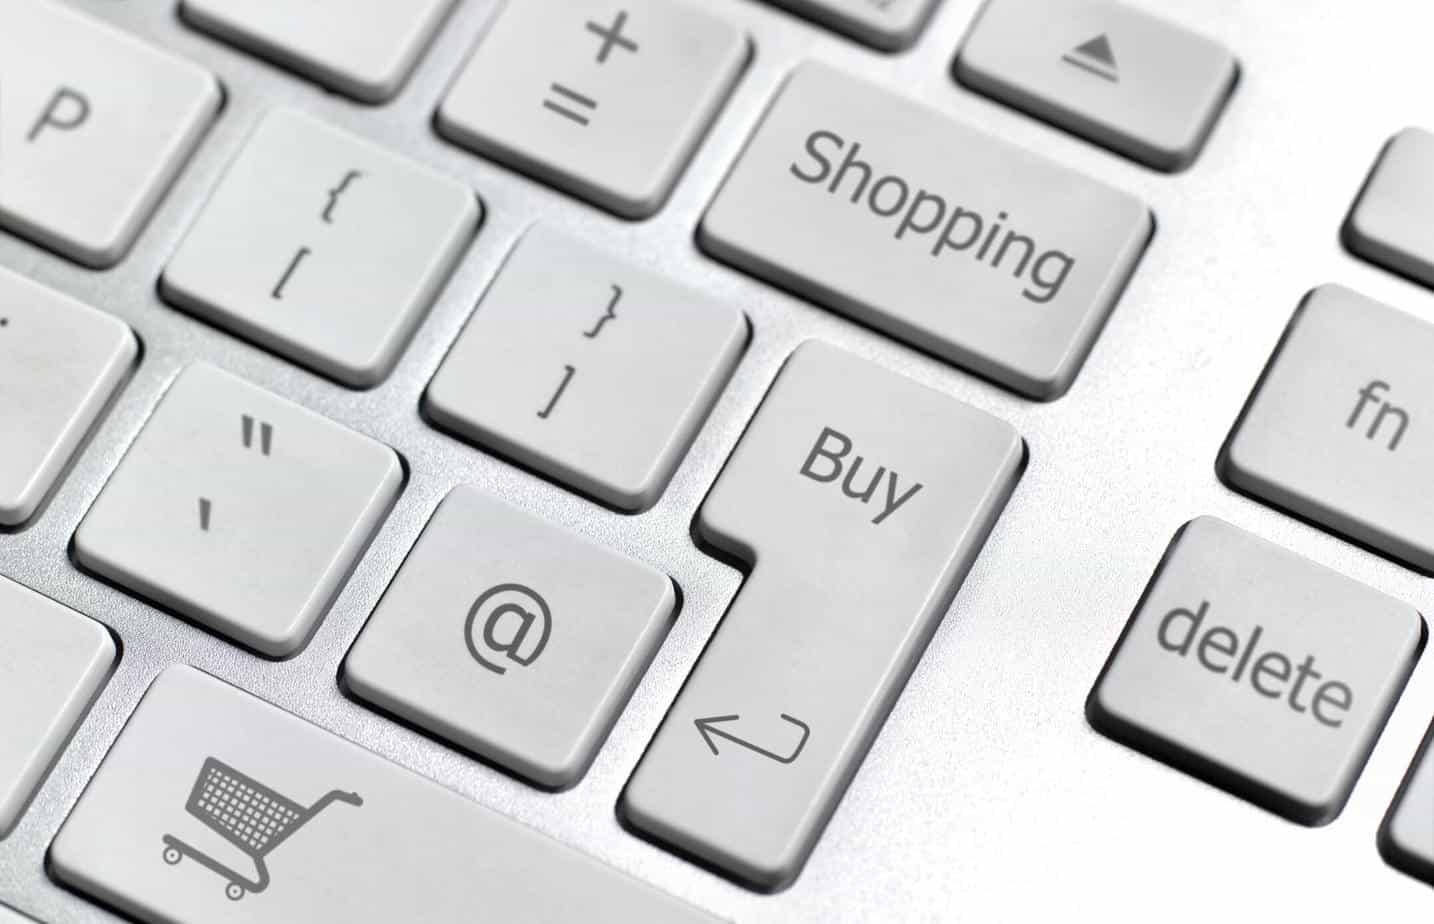 Alternatives to the online store